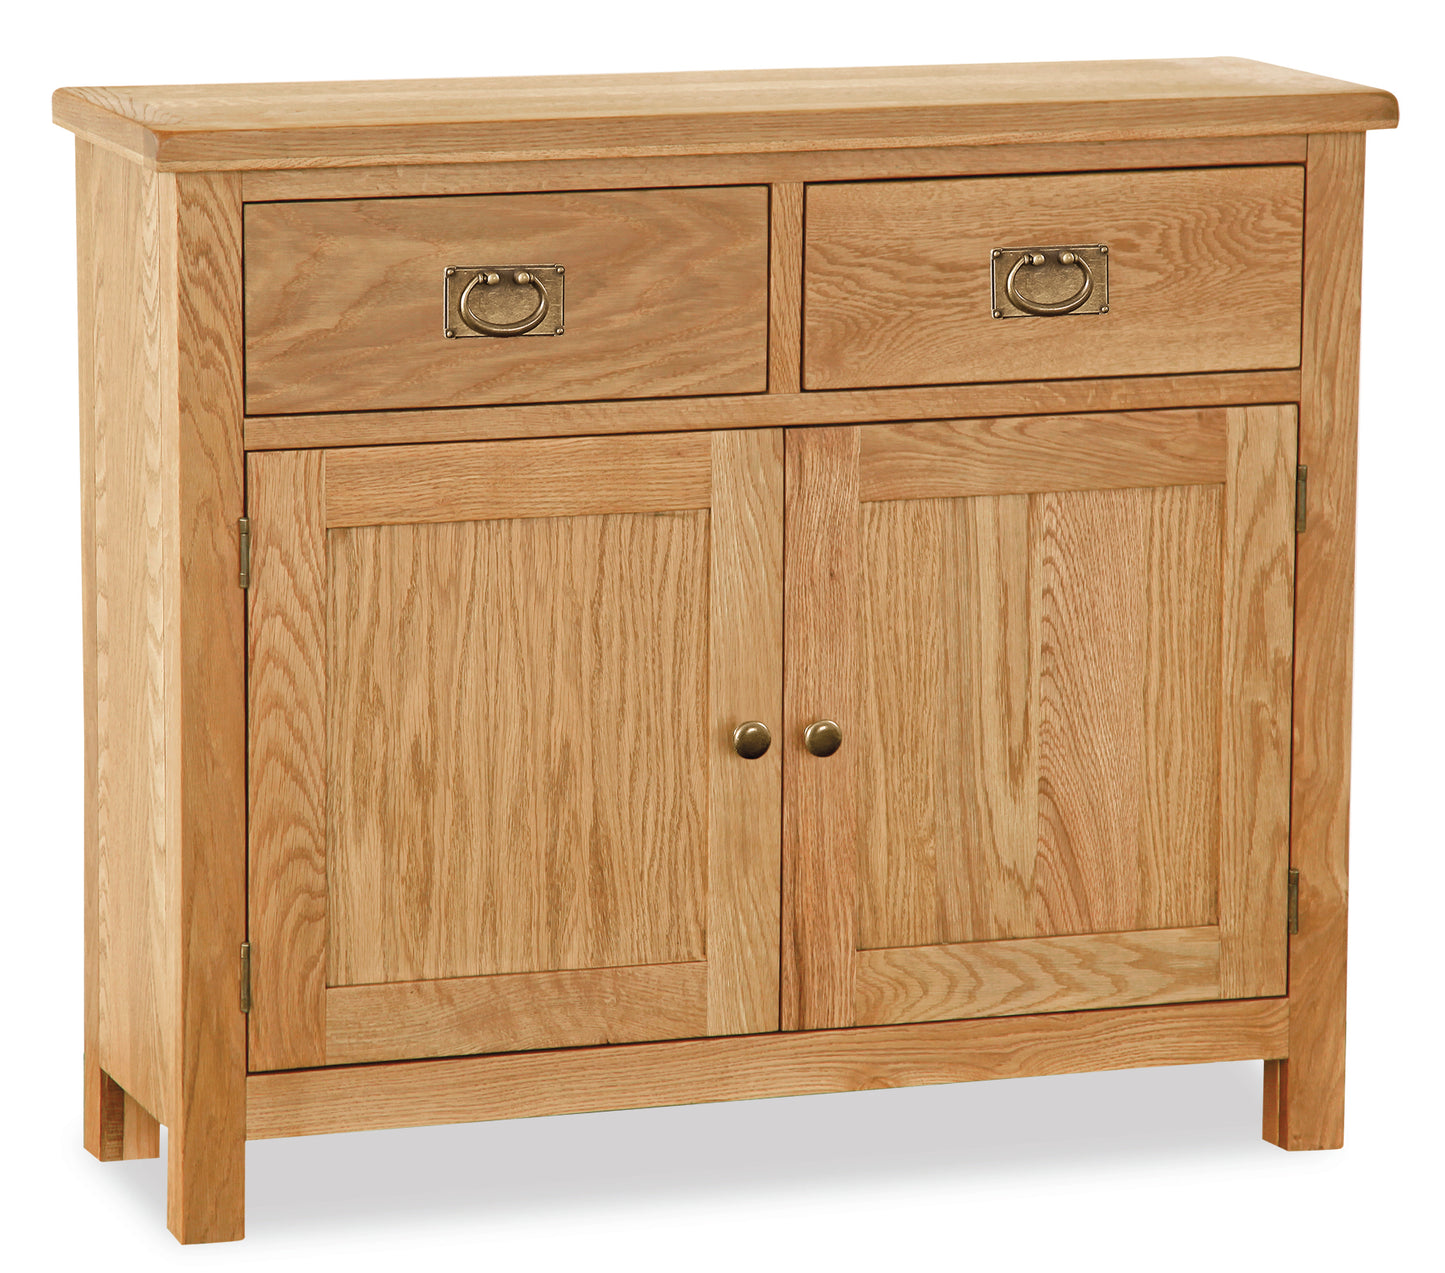 The Shrewsbury Lite Collection - Small Sideboard